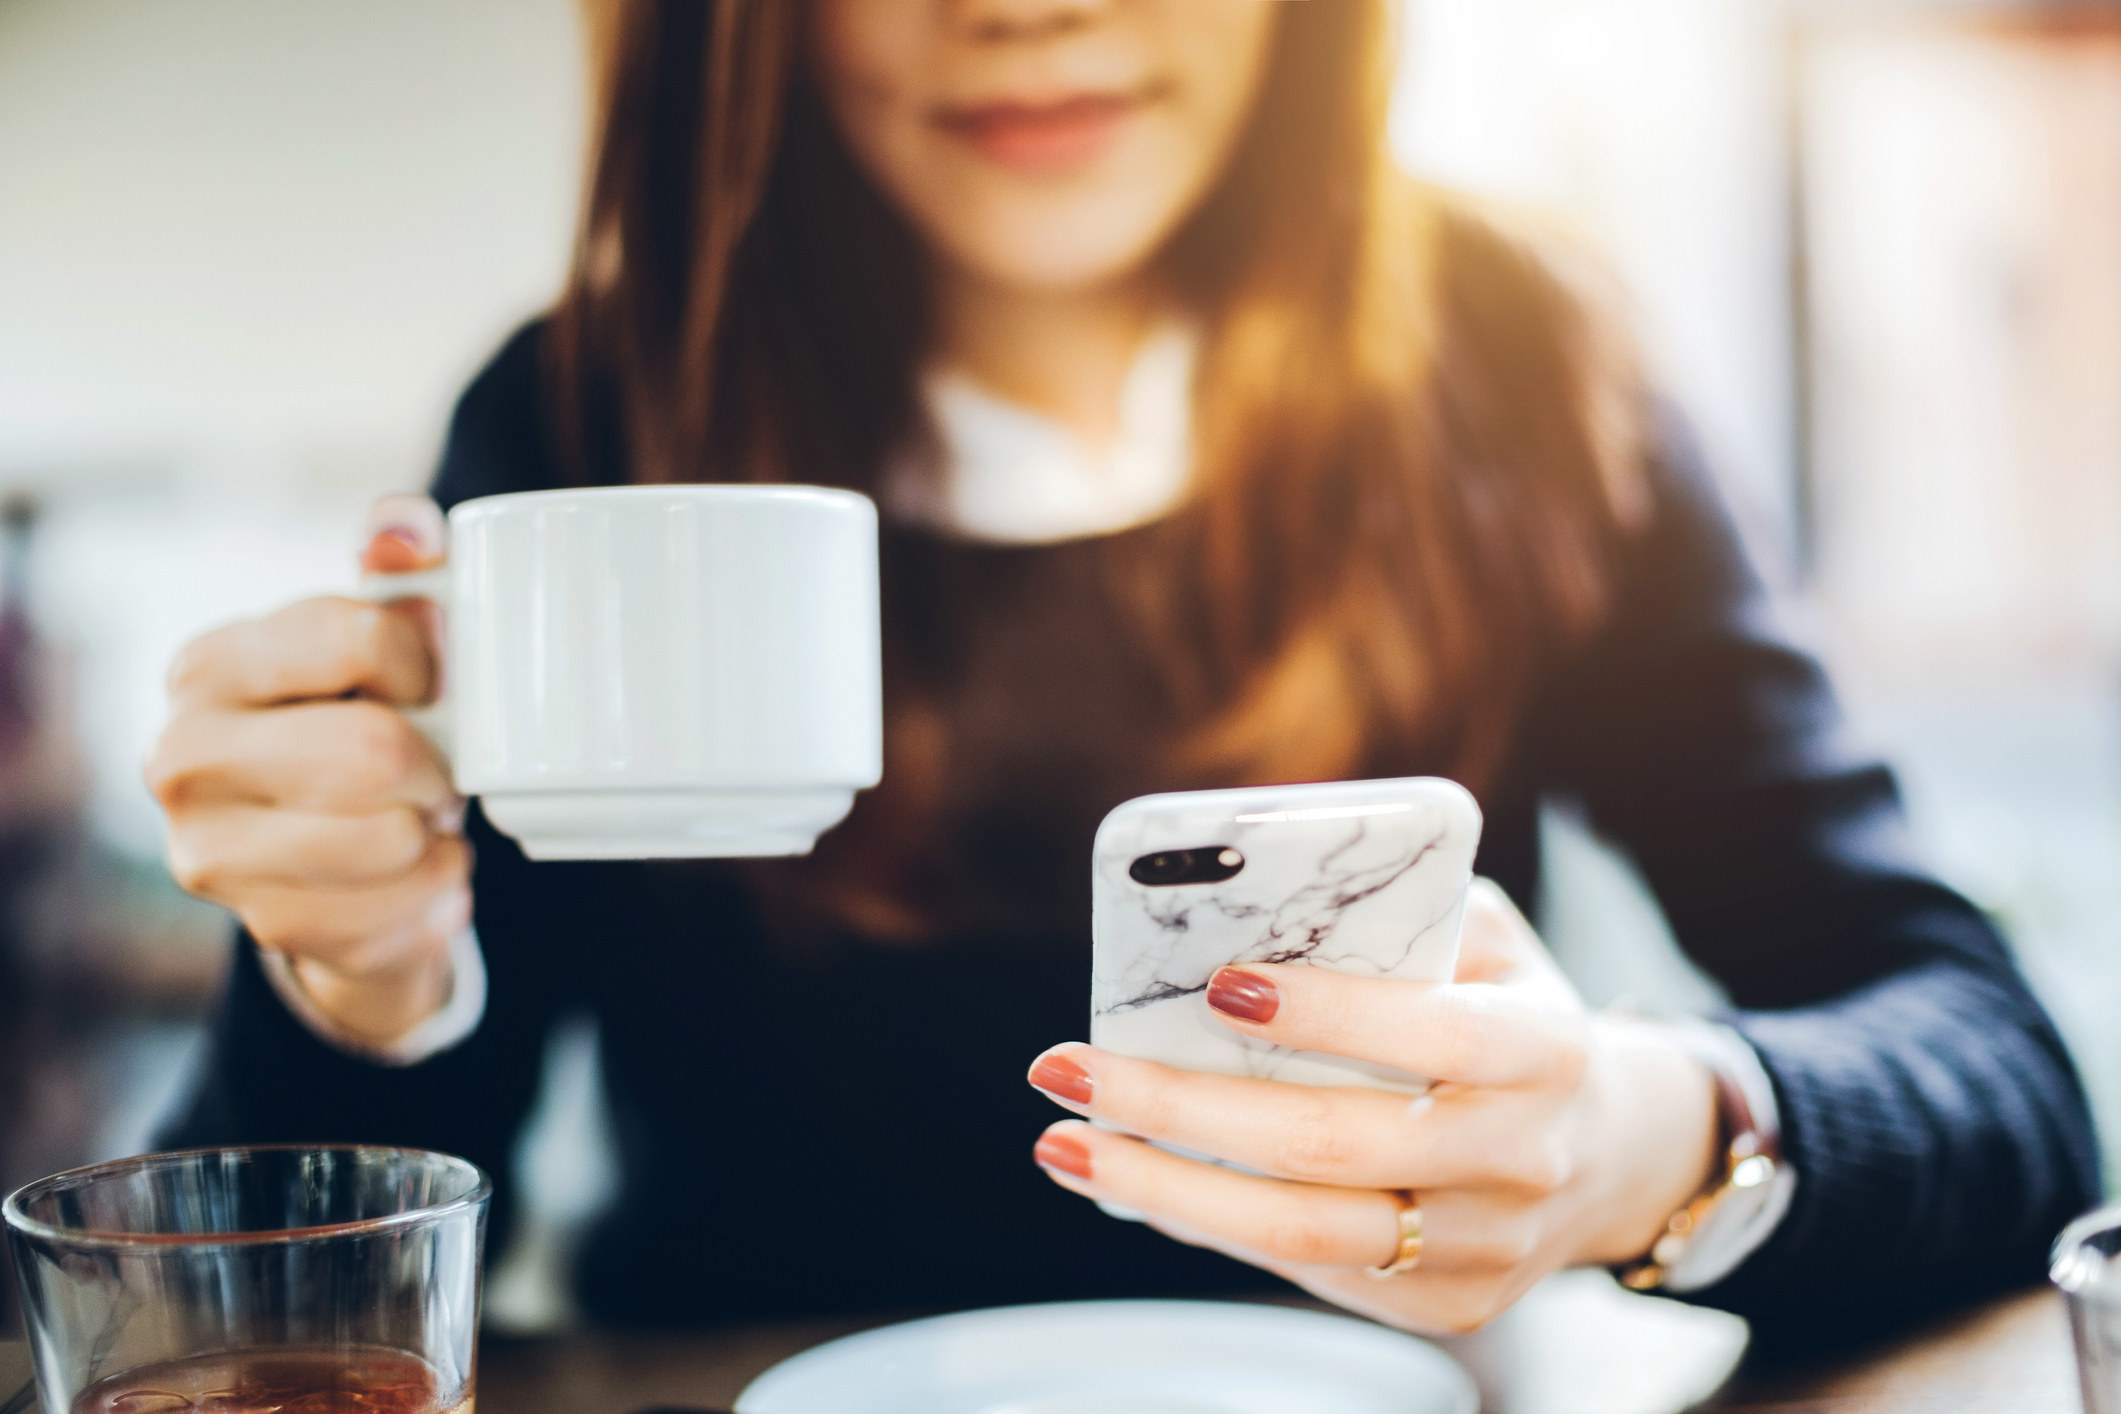 A woman looking at her mobile phone while drinking coffee